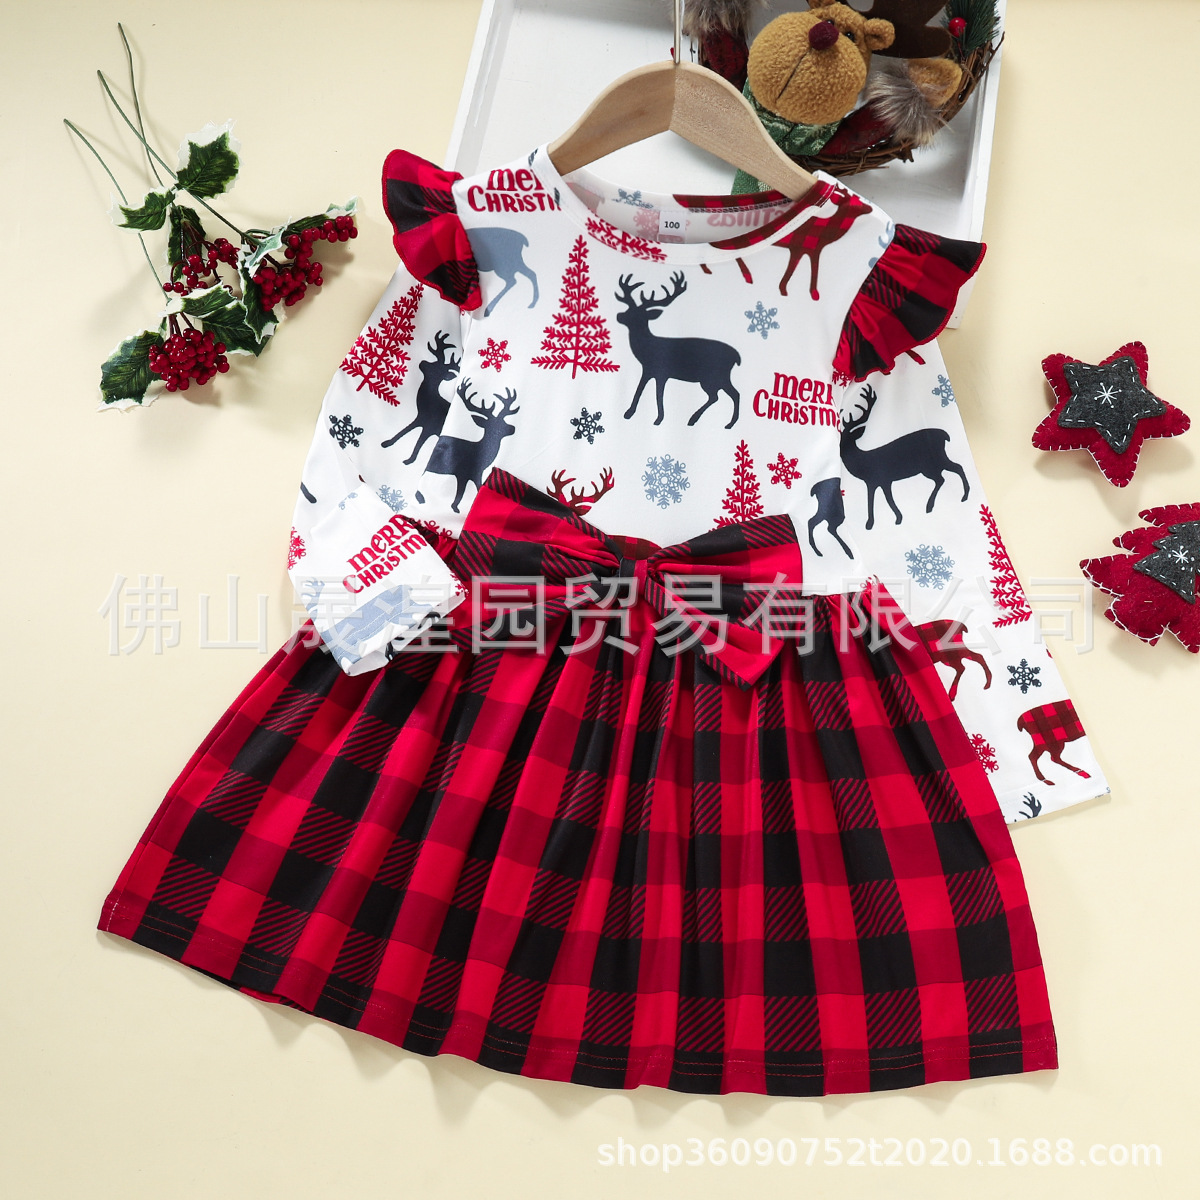 Foreign Trade Children's Clothing Wholesale European And American Christmas Clothes Plaid Cotton Stitching Flying Sleeve Bowknot Cute Baby Dress